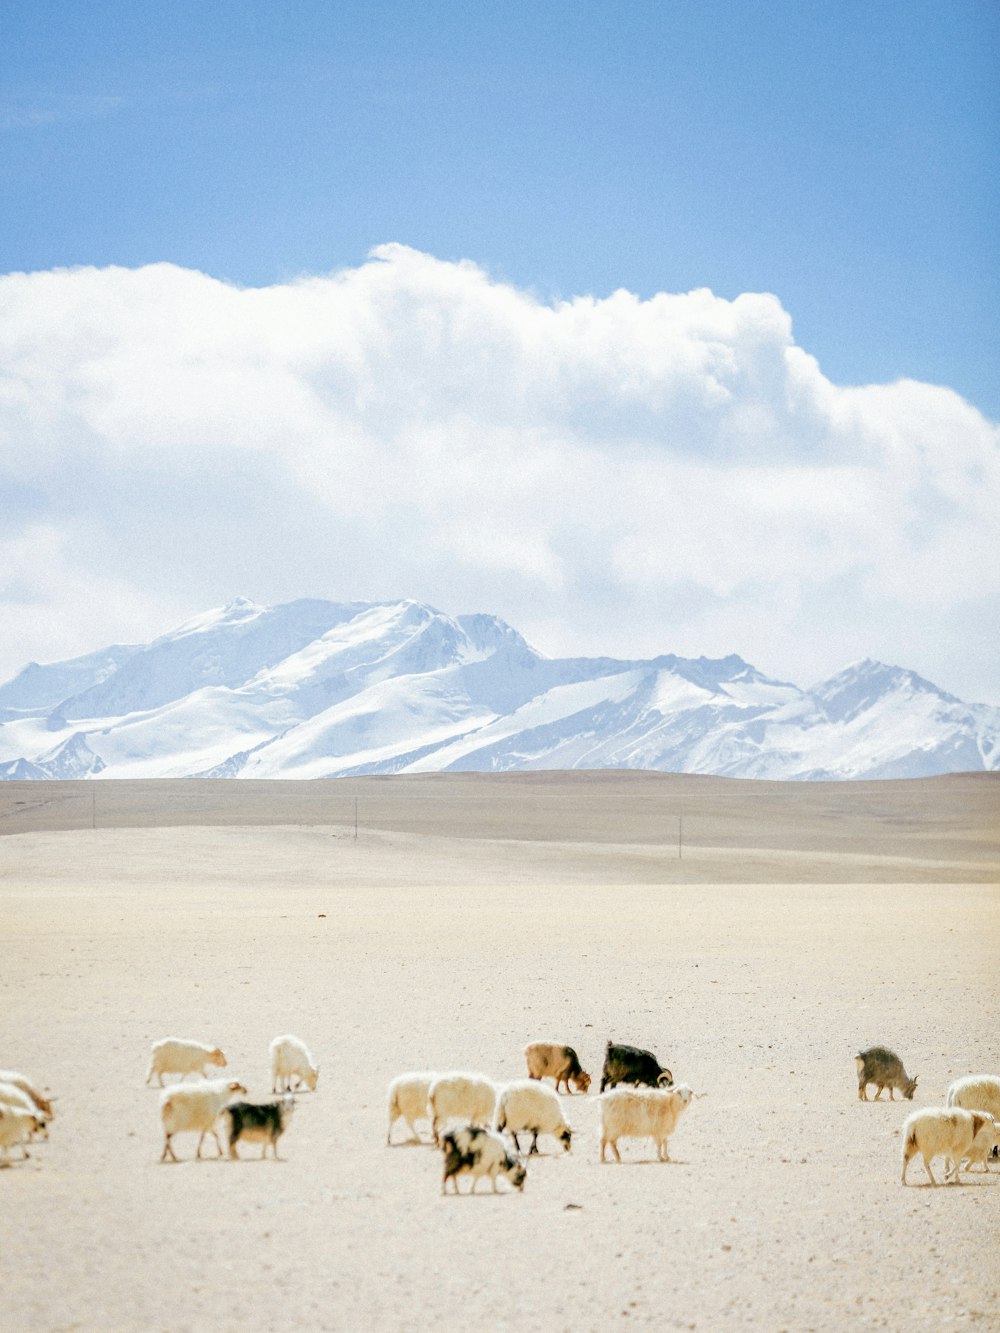 a herd of sheep grazing in a desert with mountains in the background